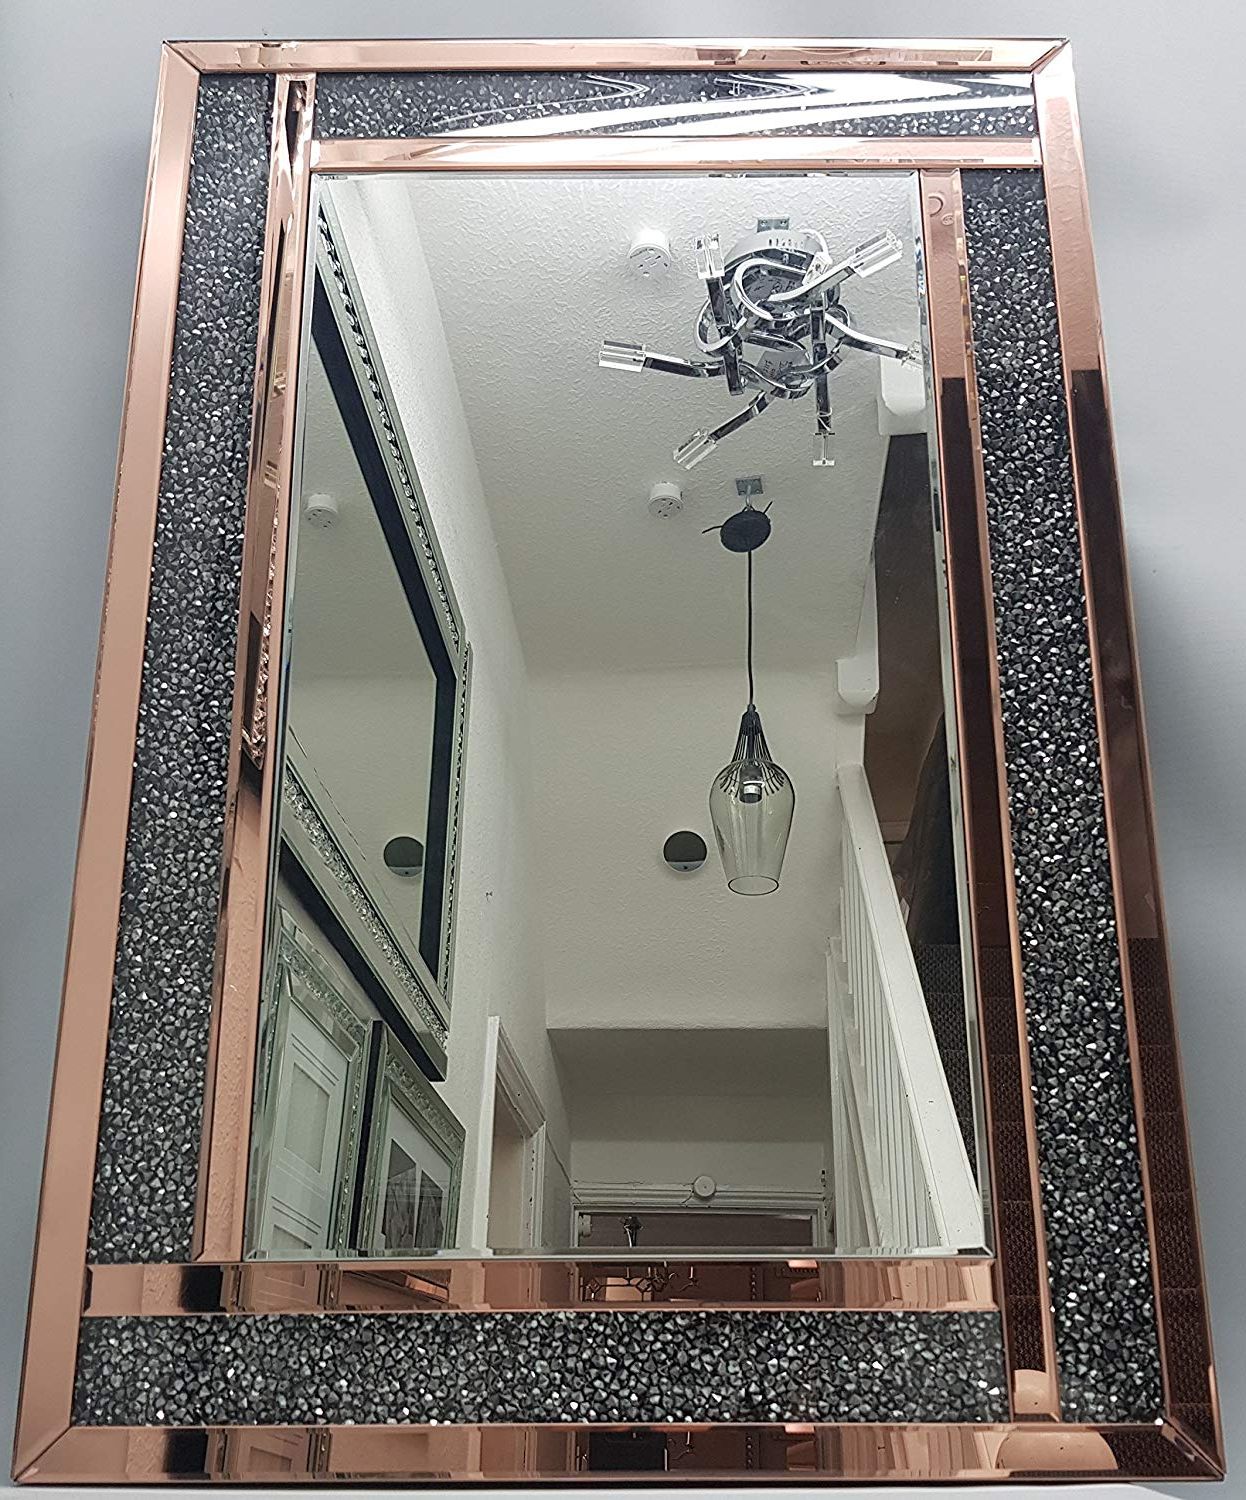 2019 Large Silver Wall Mirrors In Mh Diamond Crush Rose Gold Premium Large Wall Mirror 60x90 With (View 18 of 20)